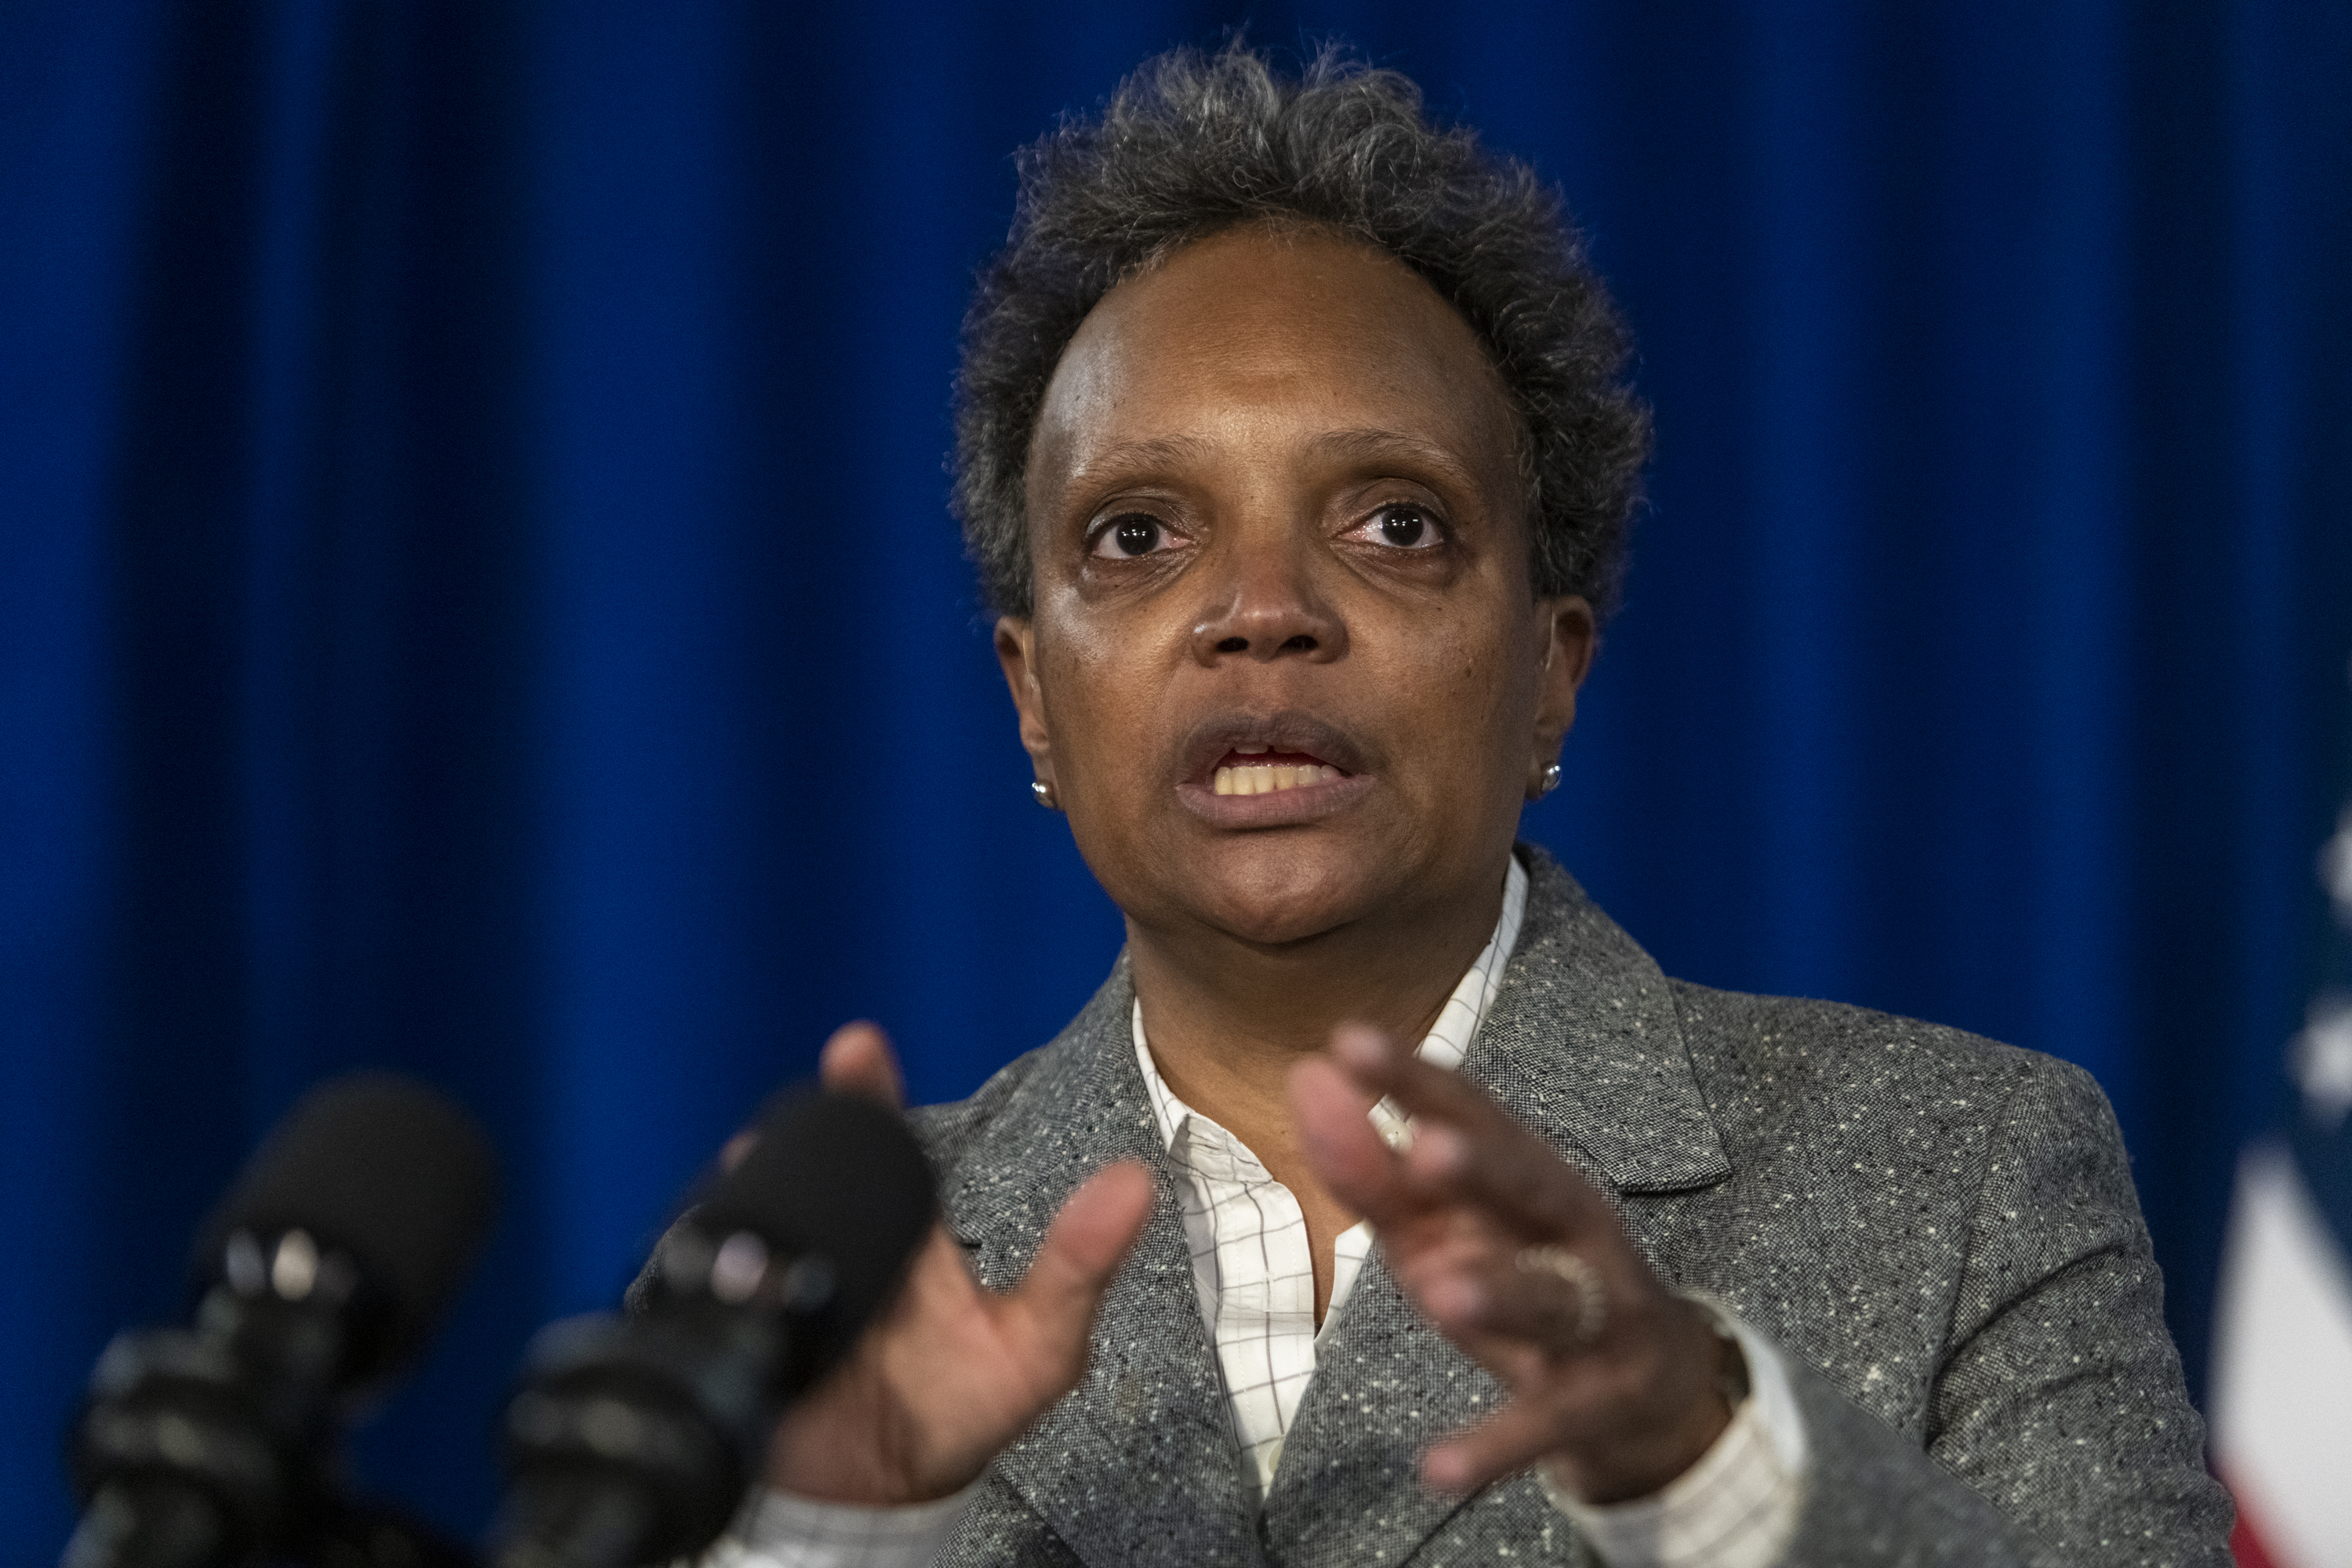 Mayor Lori Lightfoot speaks to reporters during a press conference at City Hall, updating reporters on the current situation with the Chicago Teachers Union on Jan. 4.